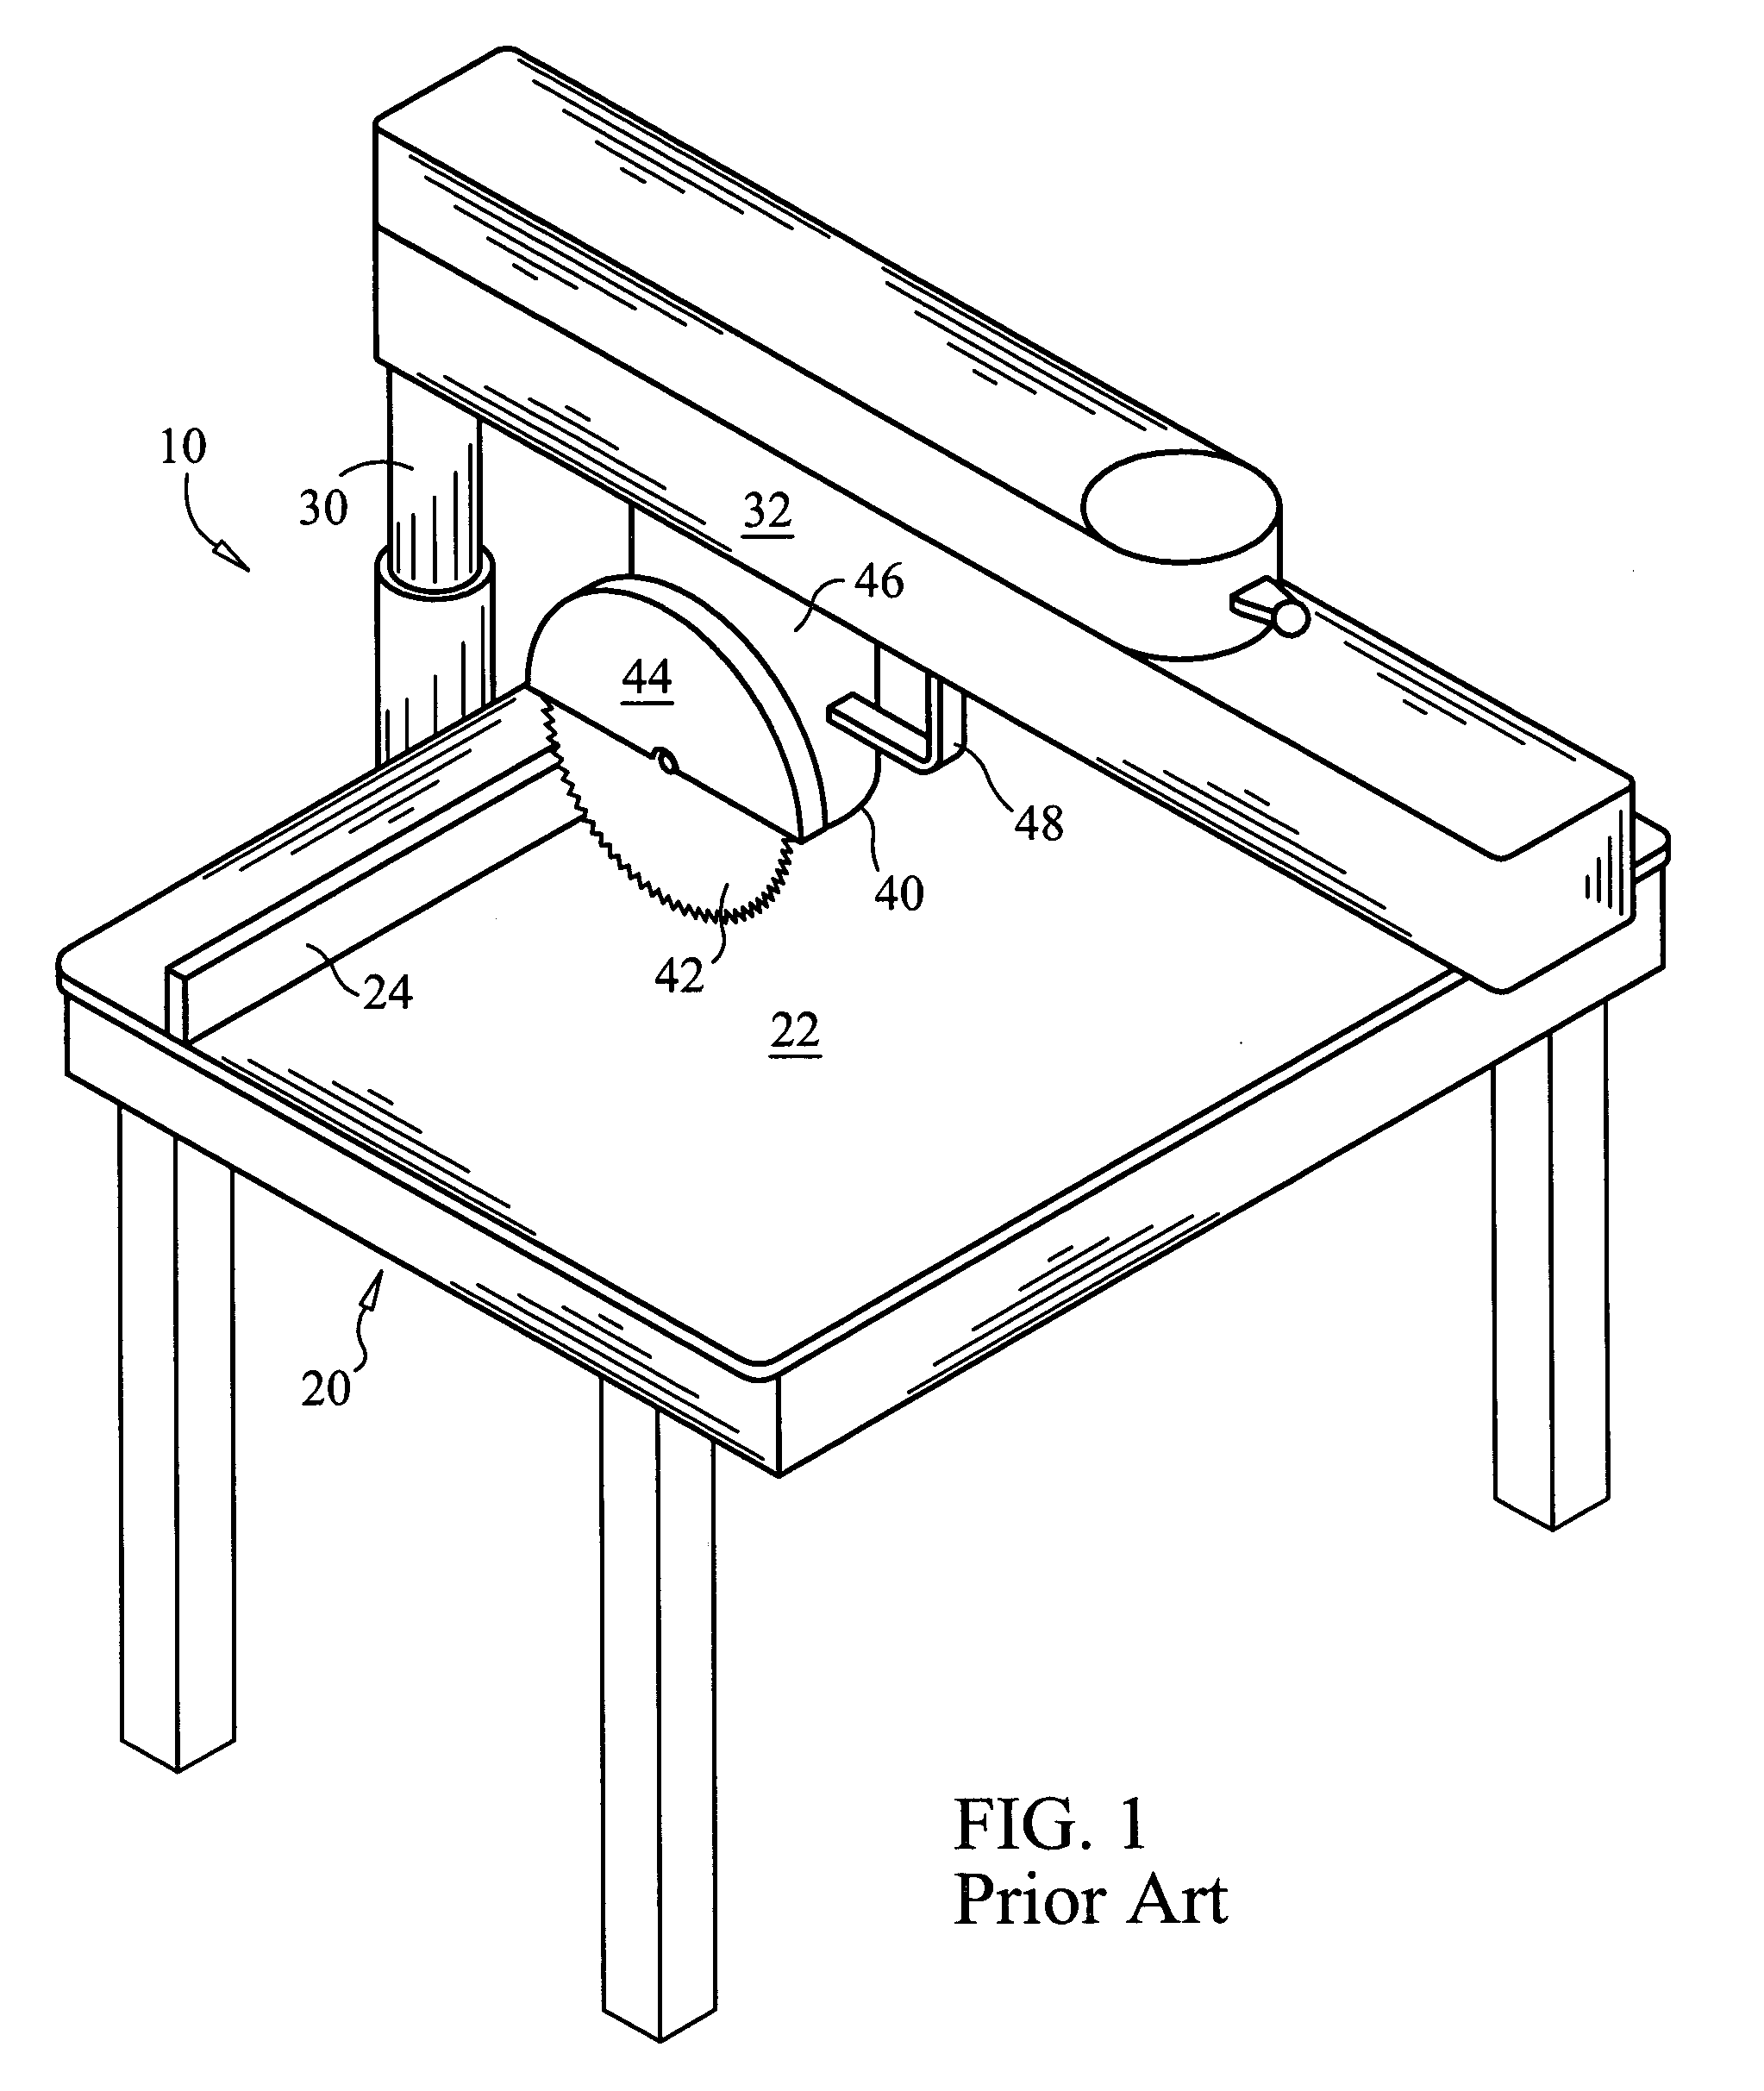 Radial arm saw safety top